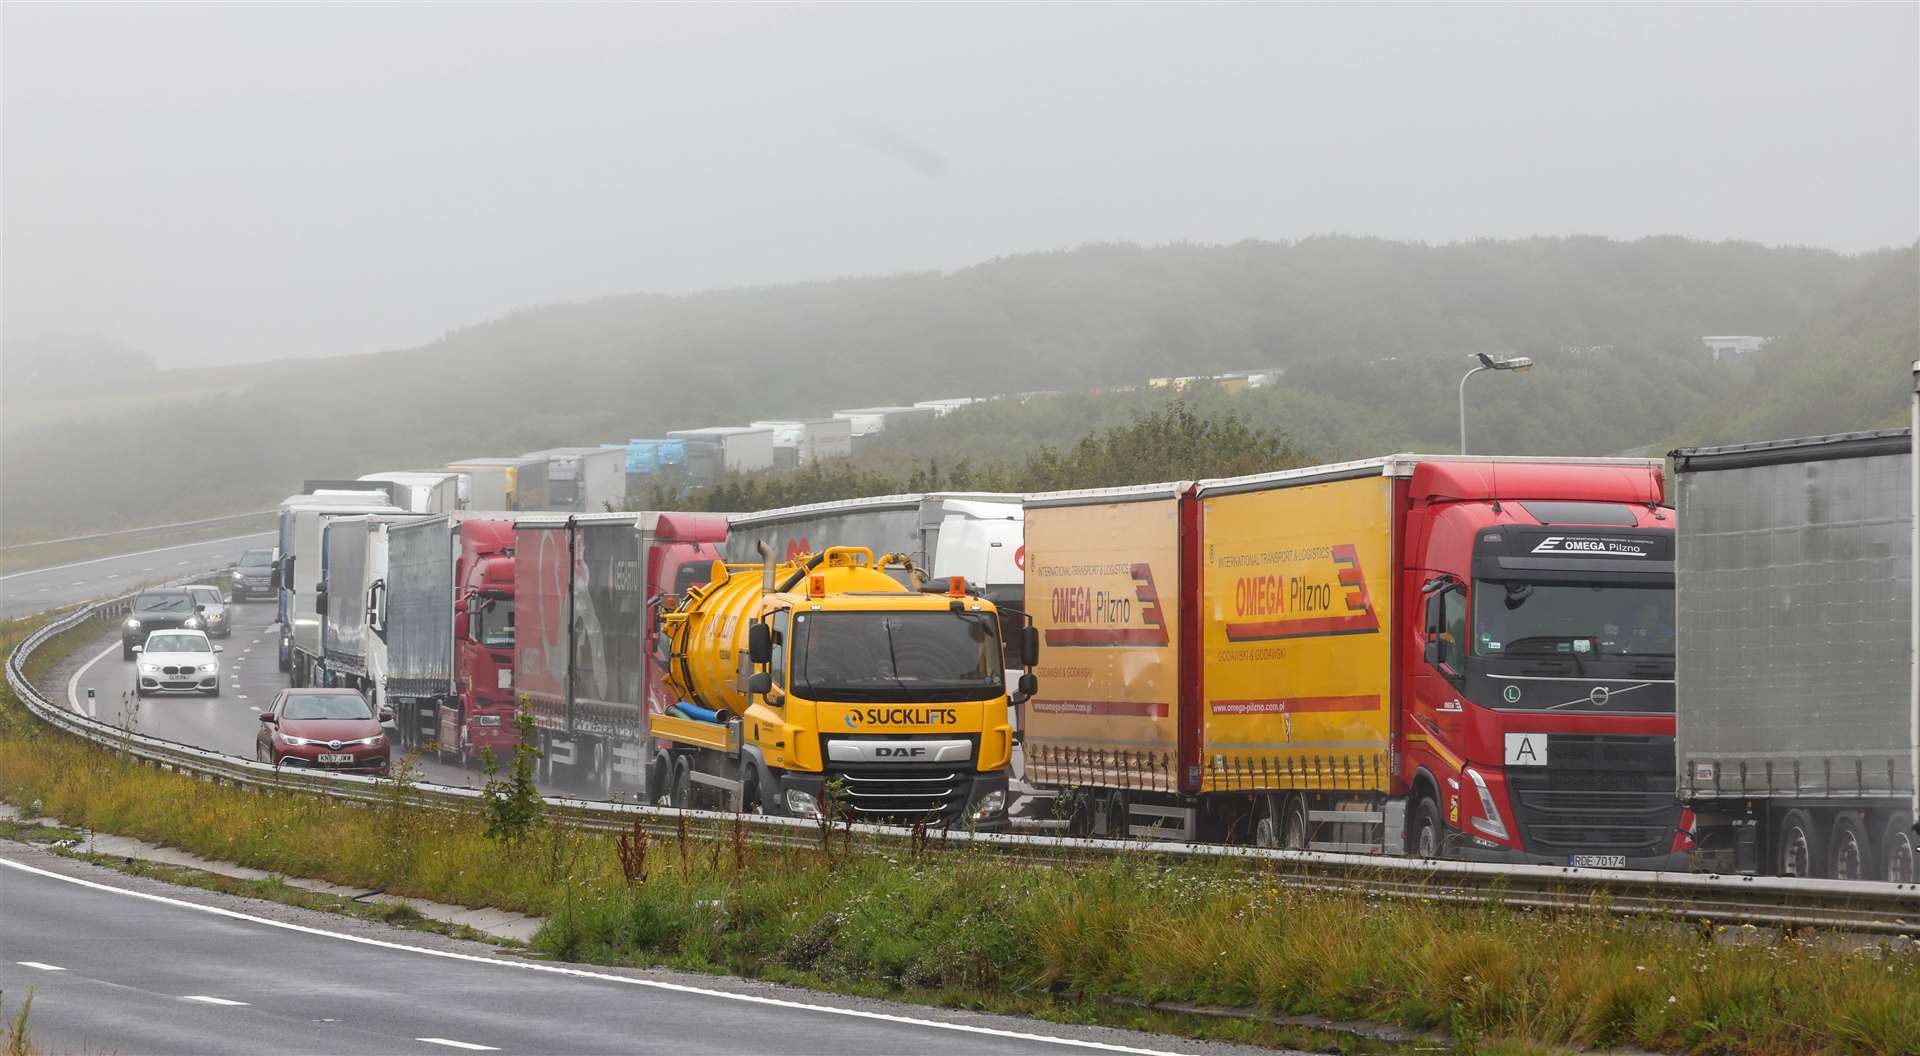 French border guards are taking up to 90 minutes to process cars and around two hours for lorries. Photo: UKNIP